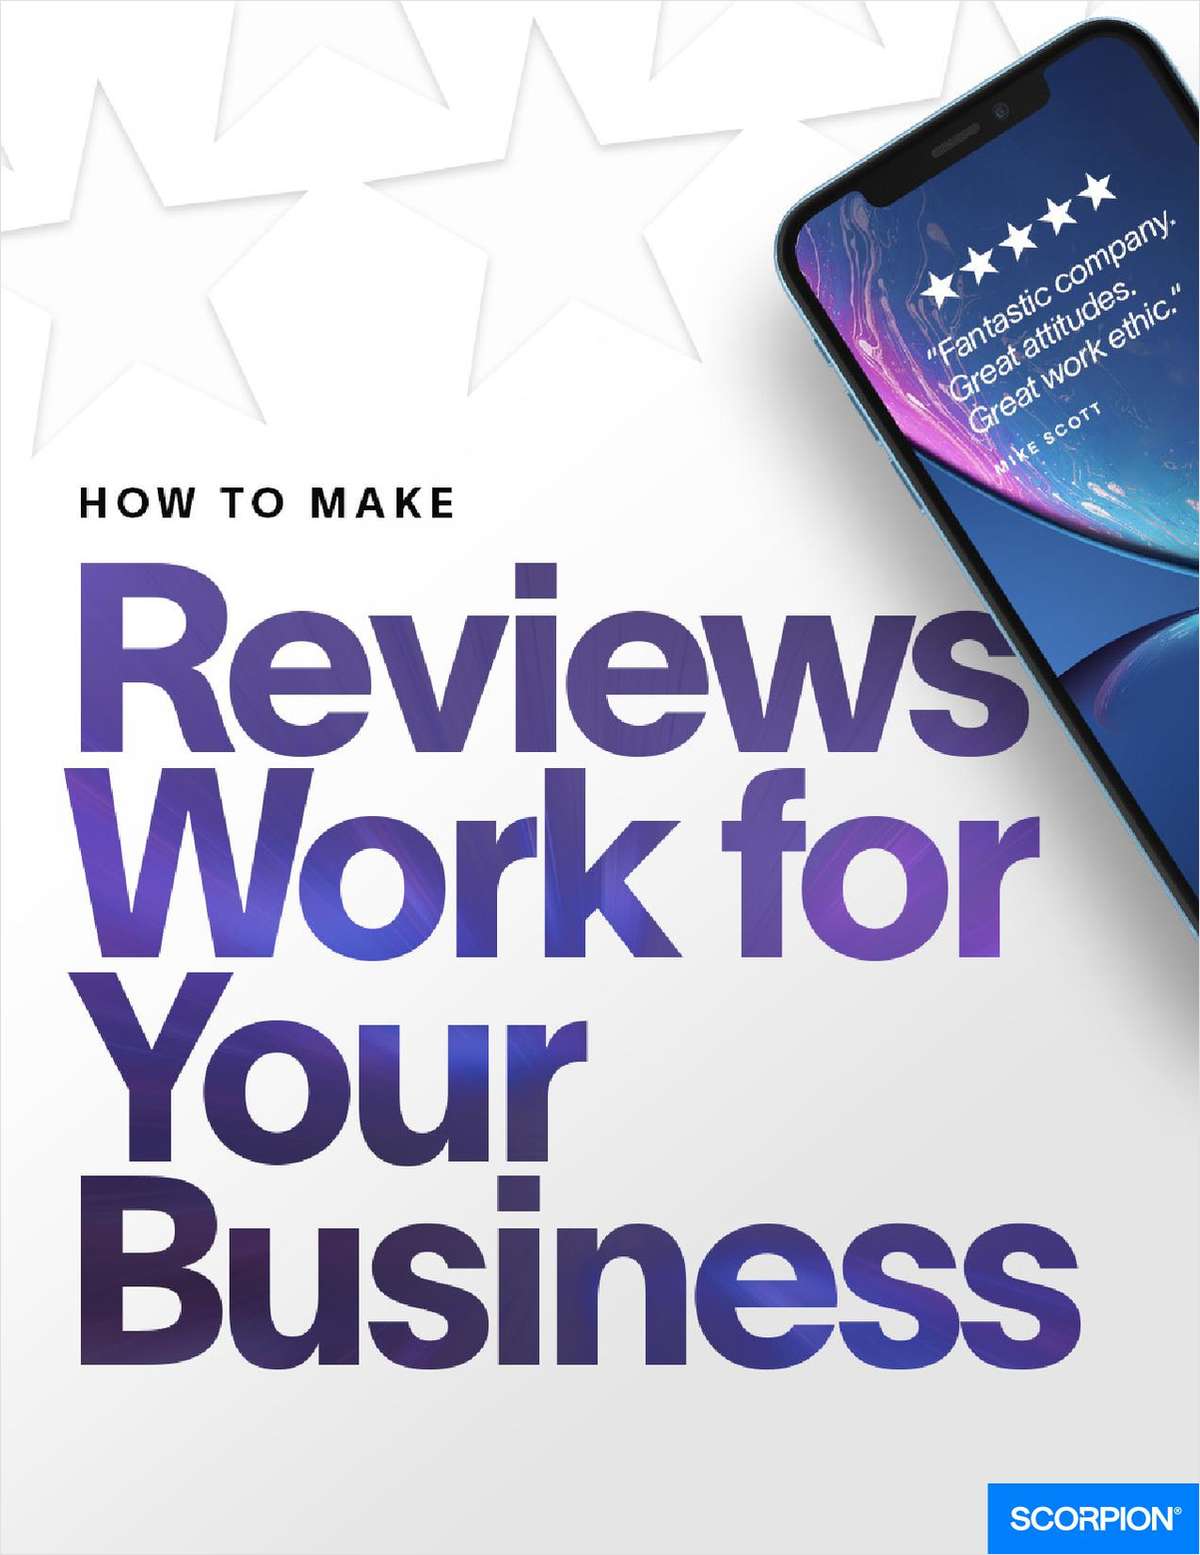 How to Make Reviews Work for Your Business